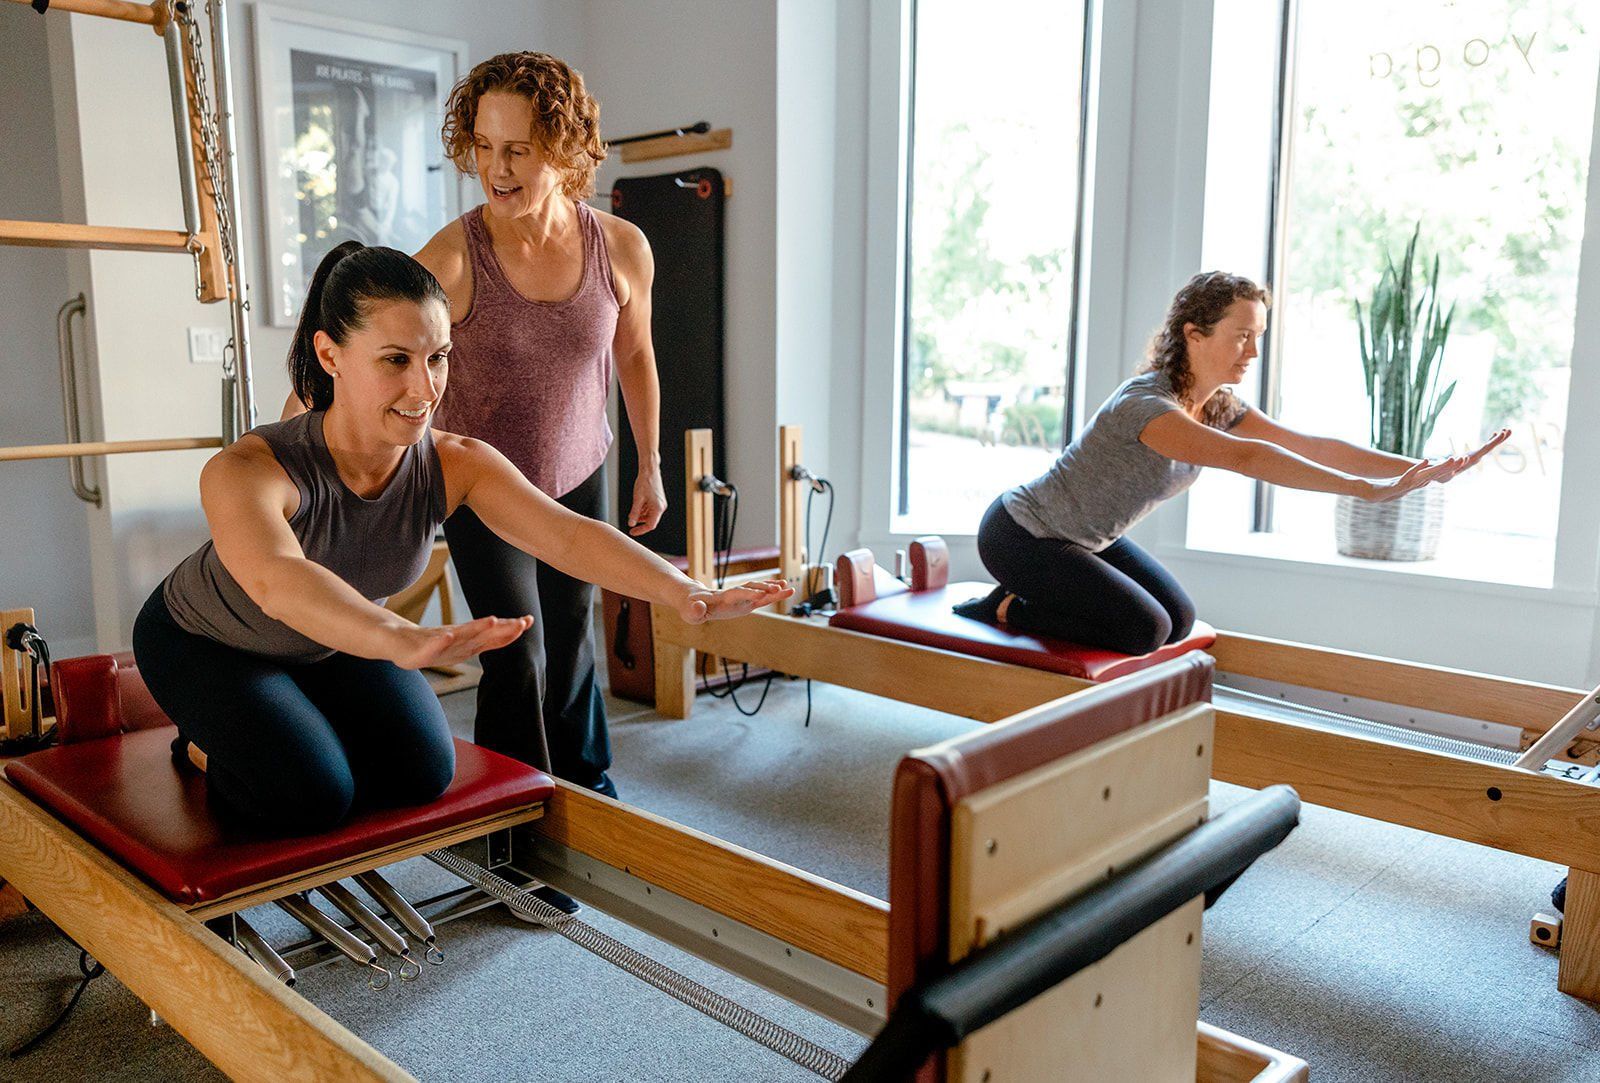 two women are doing pilates on a pilates machine in a gym .